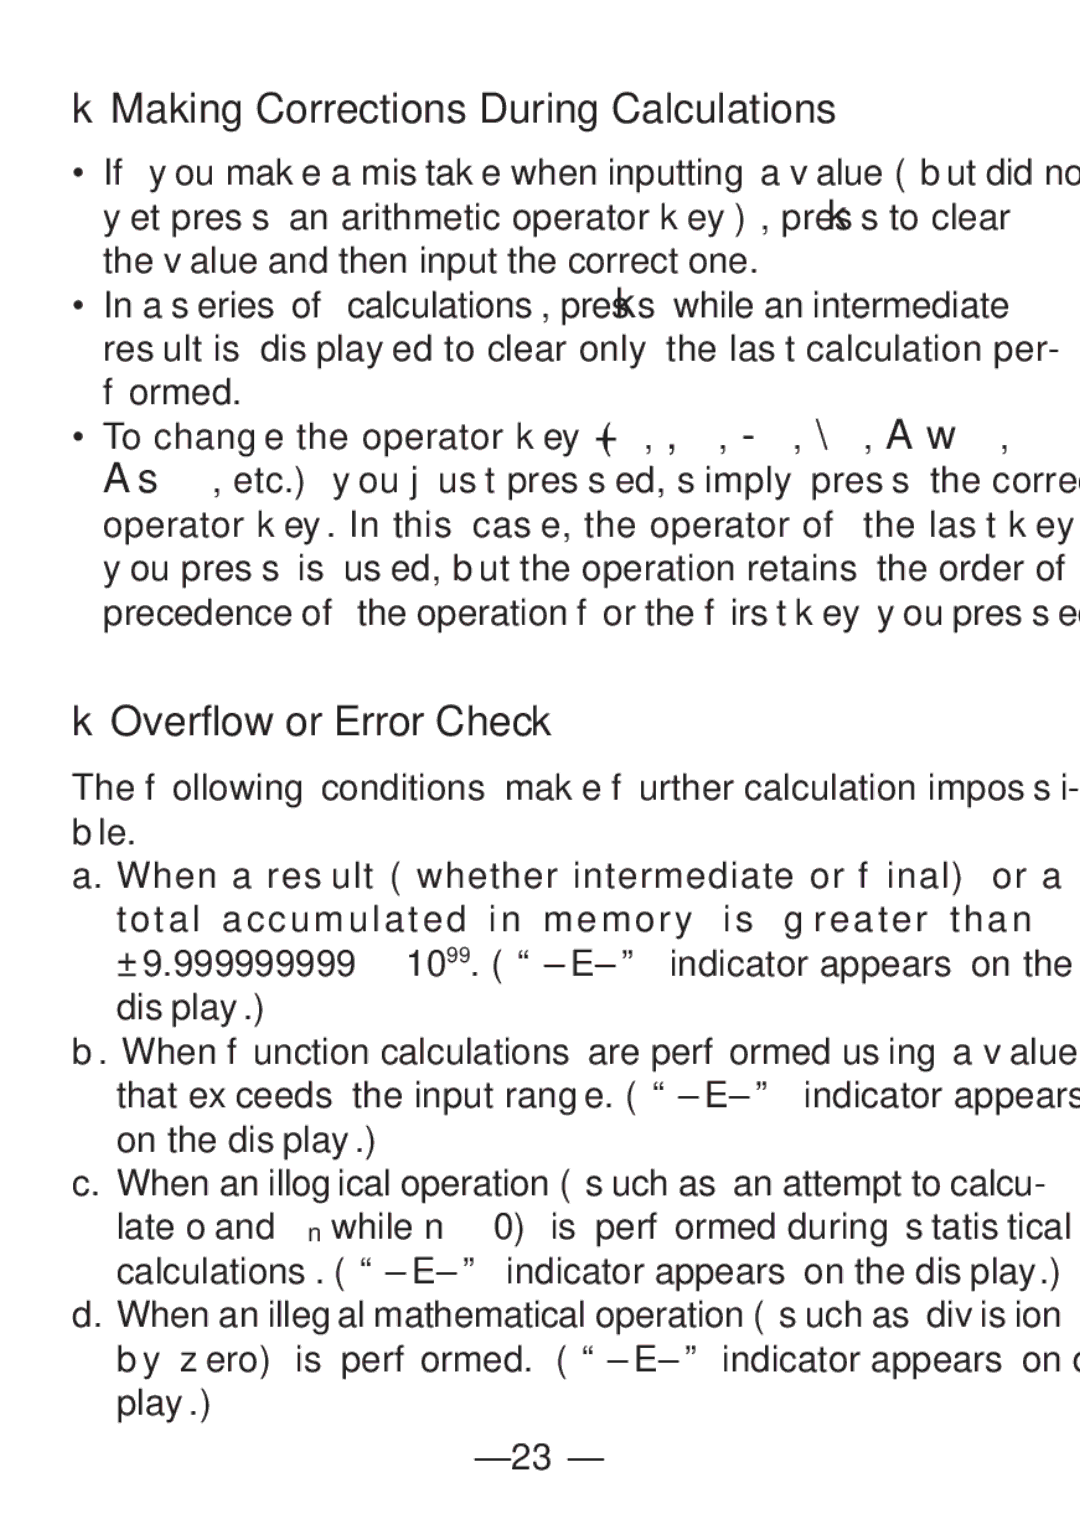 Casio FX-82SX manual KMaking Corrections During Calculations, KOverflow or Error Check 